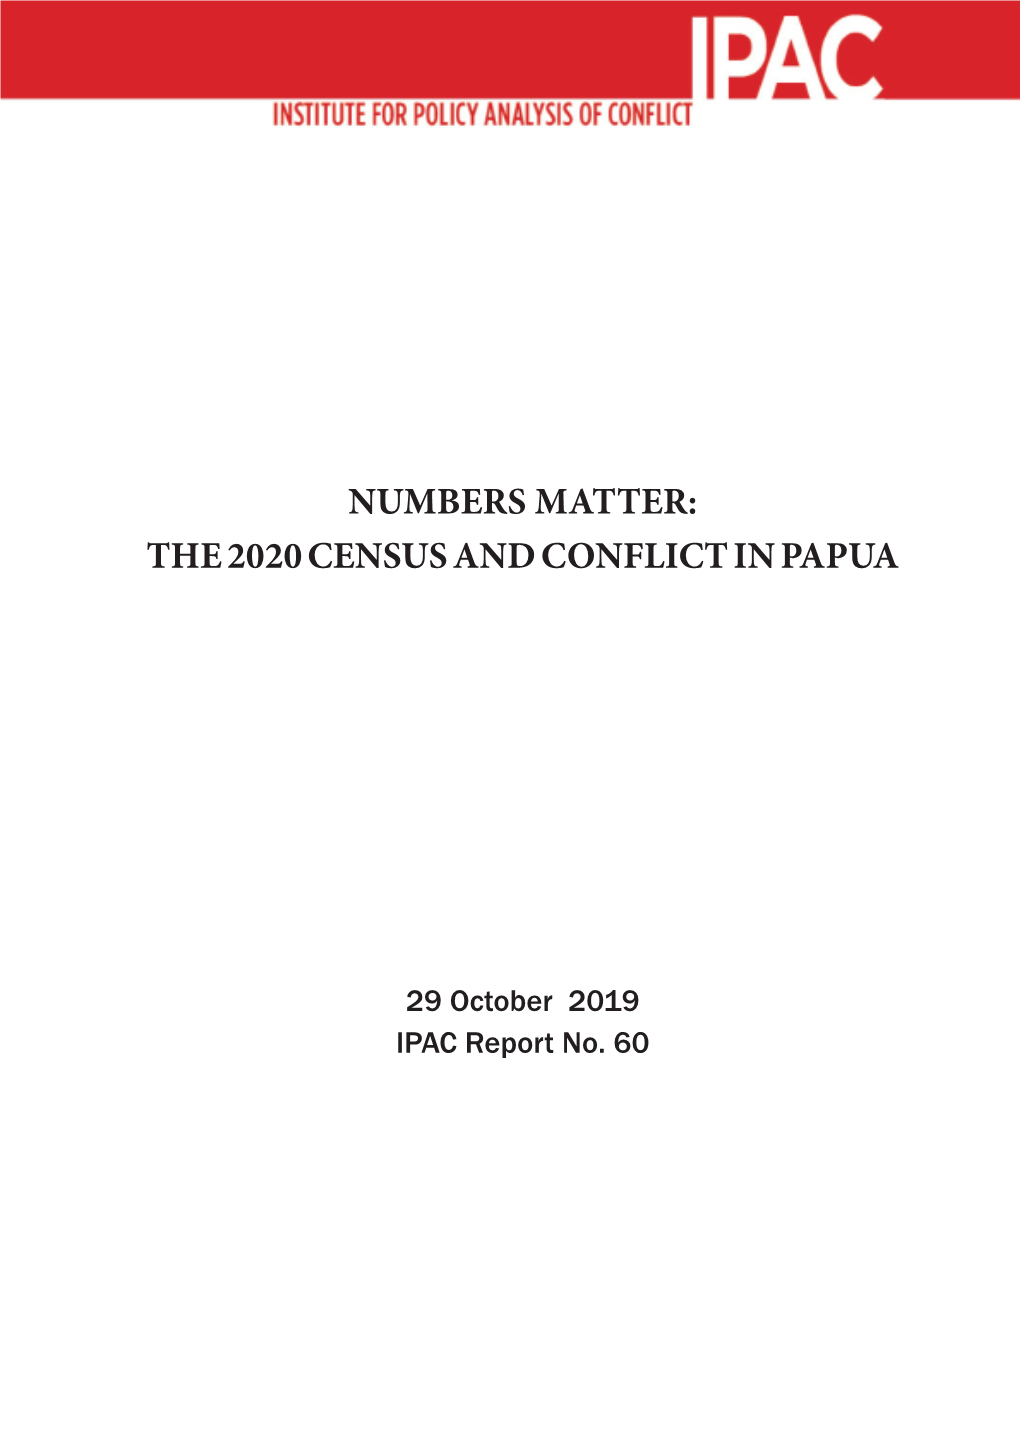 The 2020 Census and Conflict in Papua ©2019 IPAC 1 No Need for Panic: Planned and Unplanned Releases of Convicted Extremists in Indonesia ©2013 IPAC 1